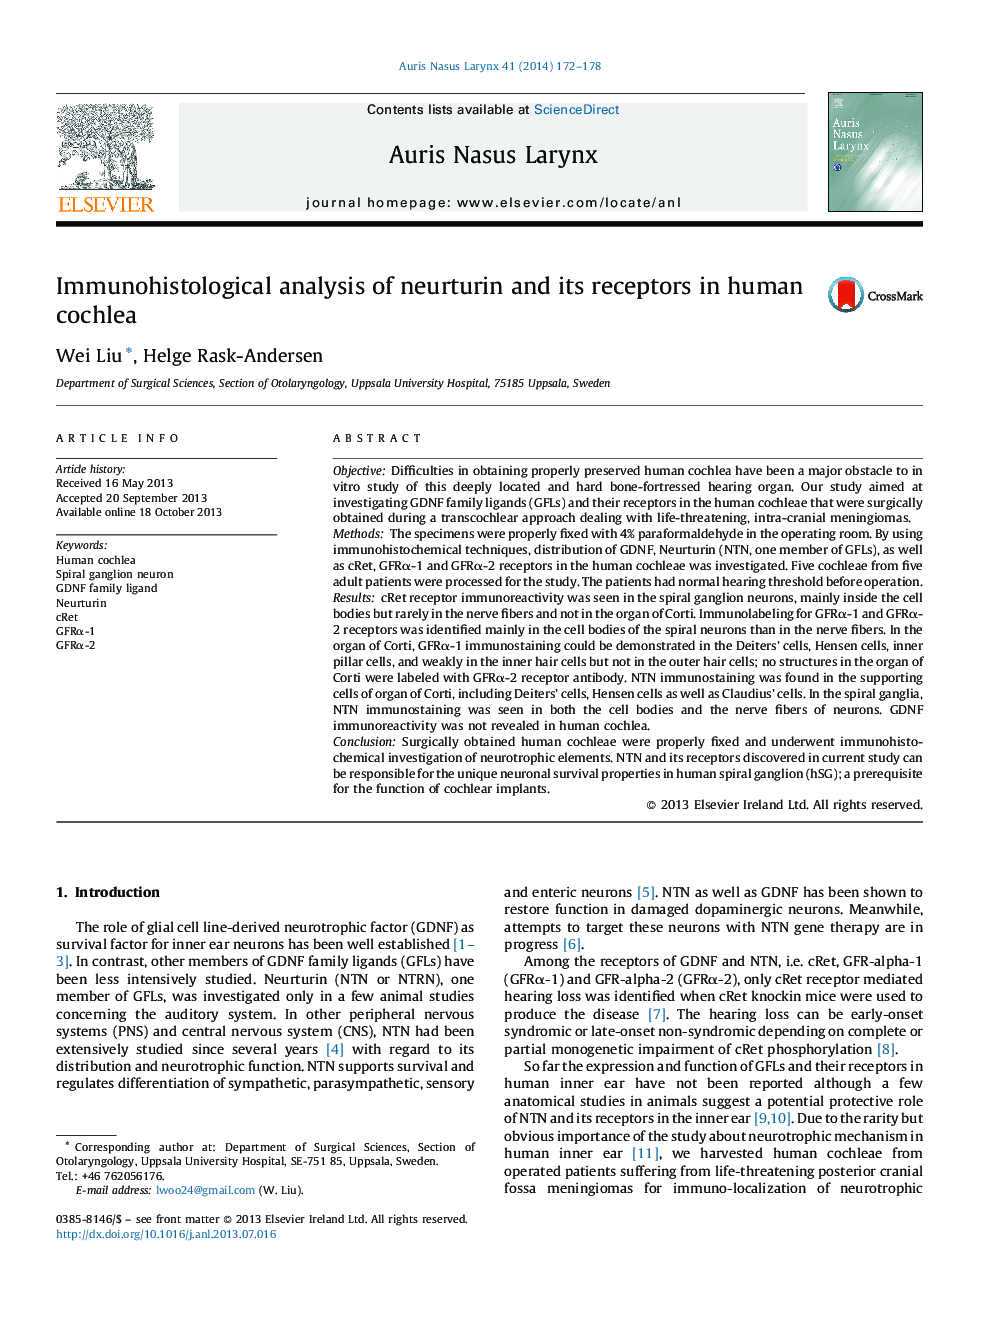 Immunohistological analysis of neurturin and its receptors in human cochlea